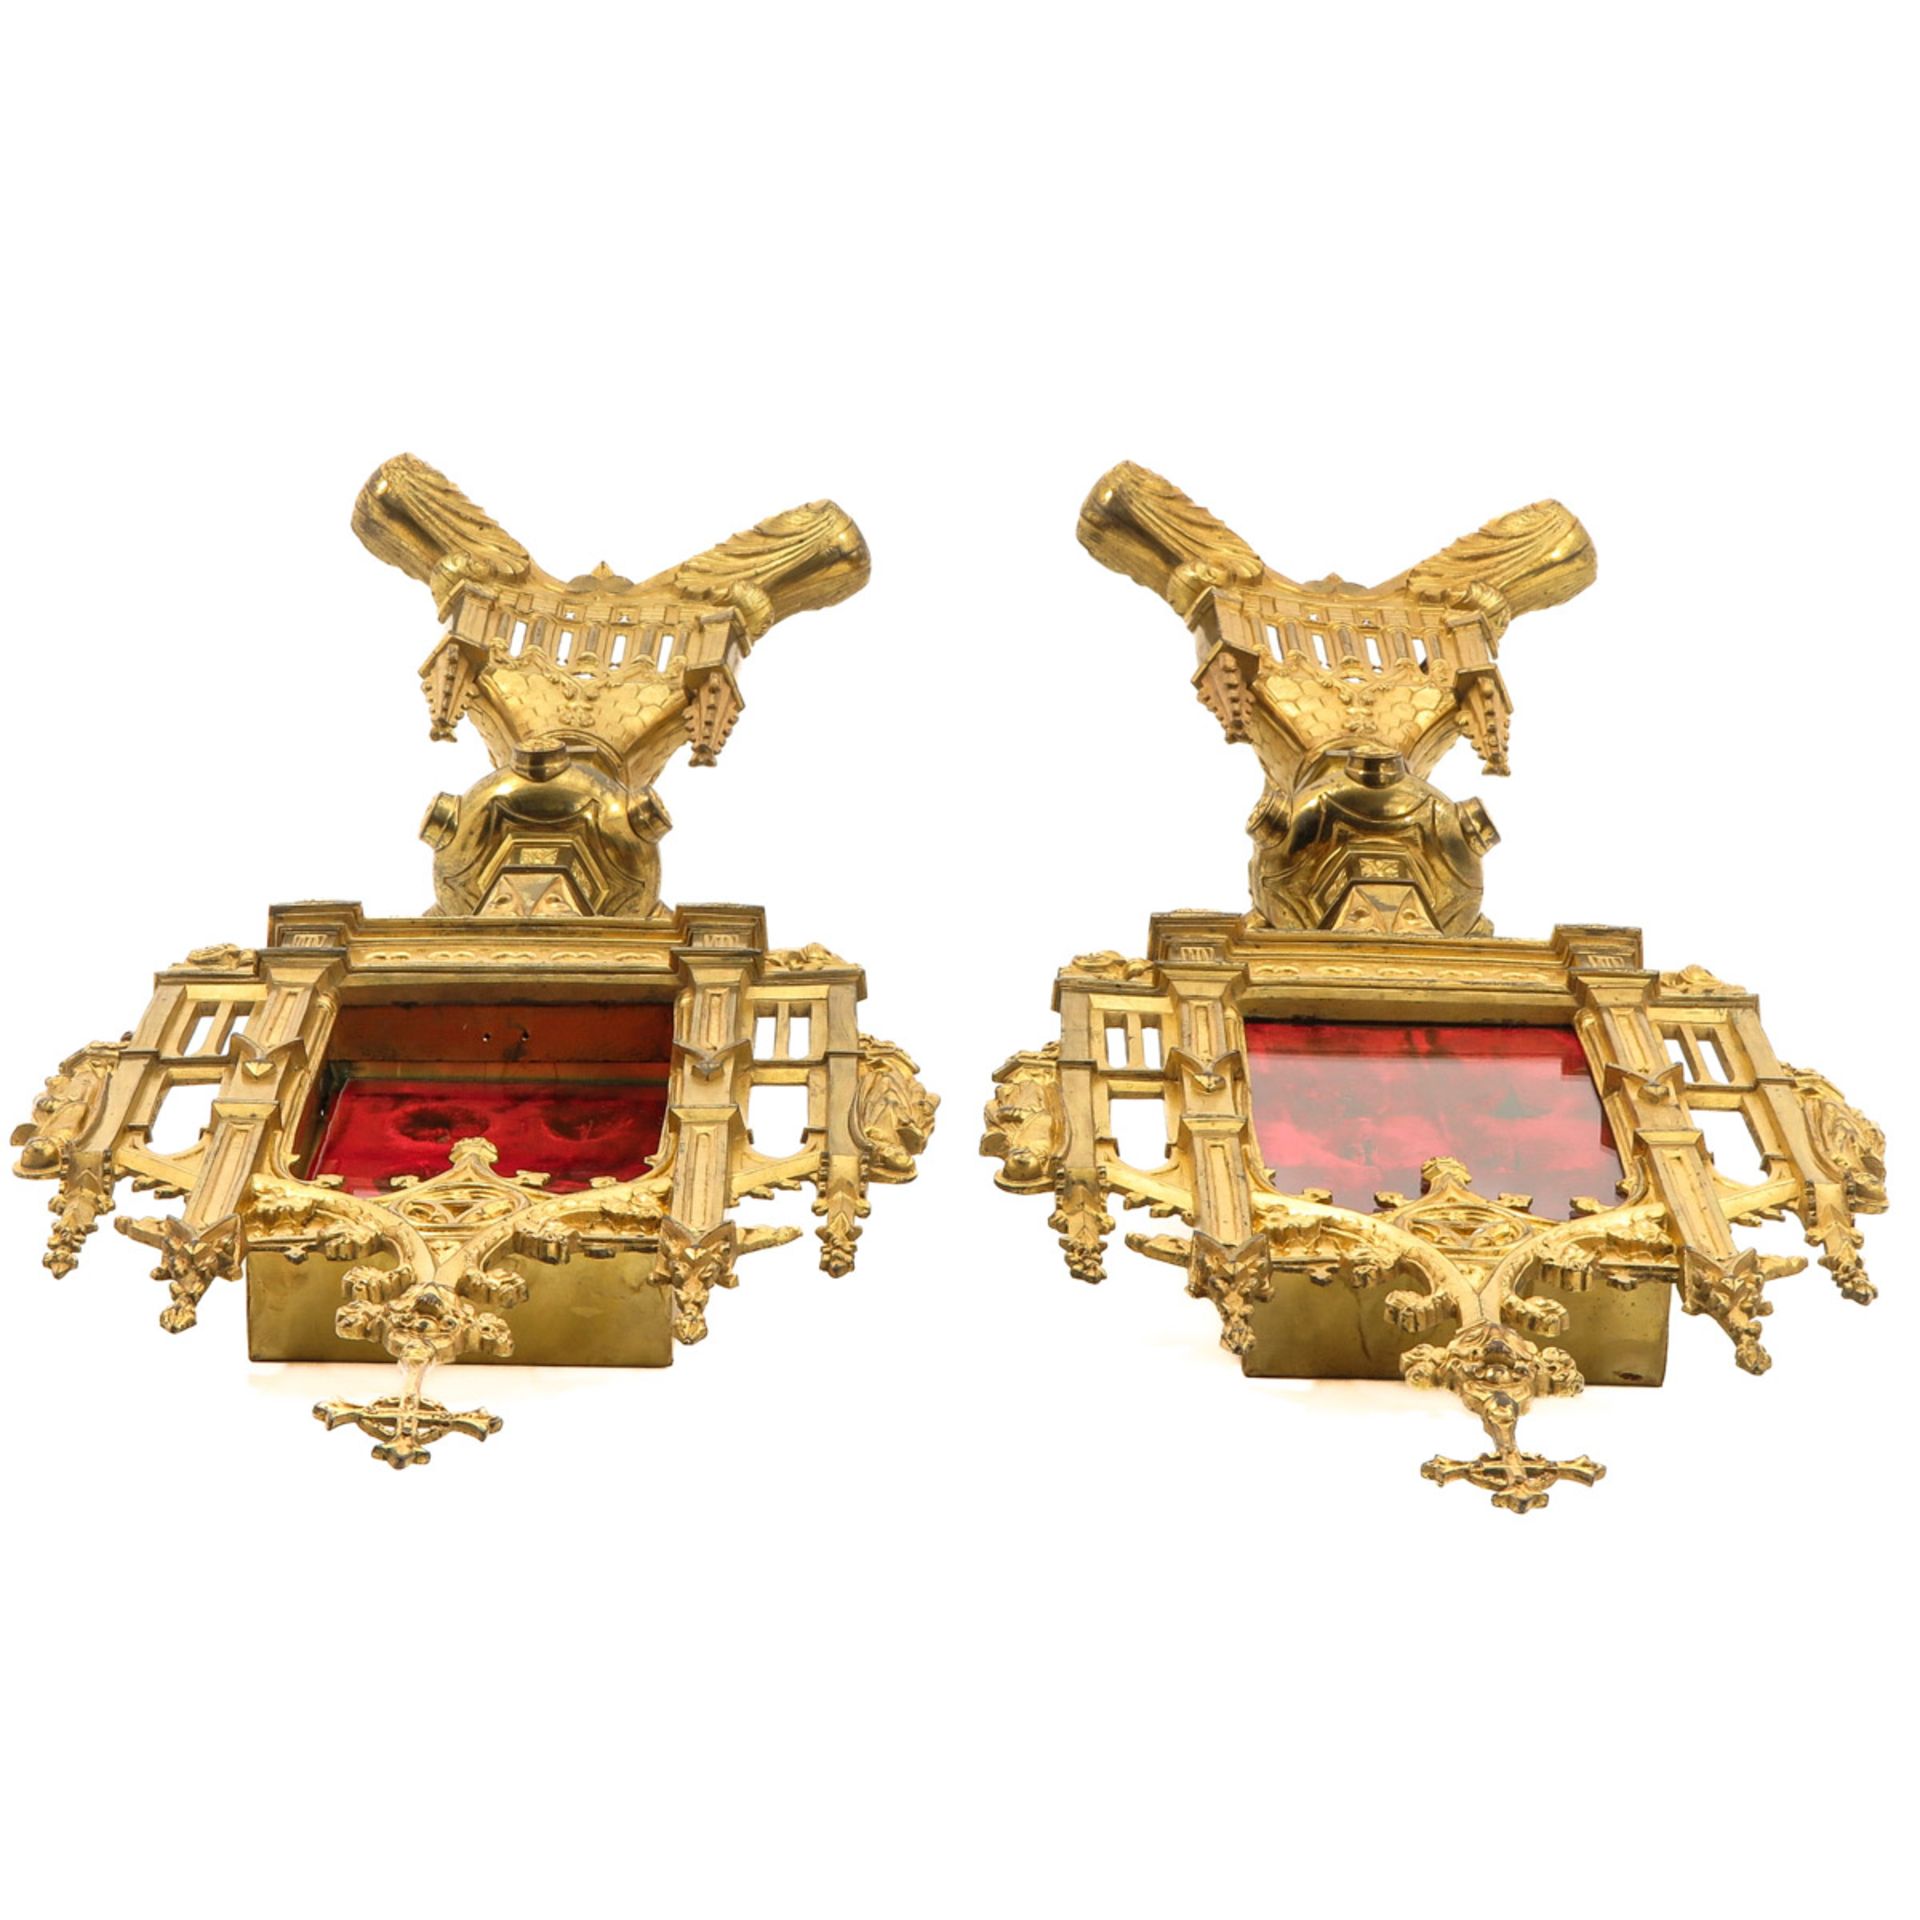 A Pair of Neo Gothic Gilded Reliquaries - Image 5 of 10